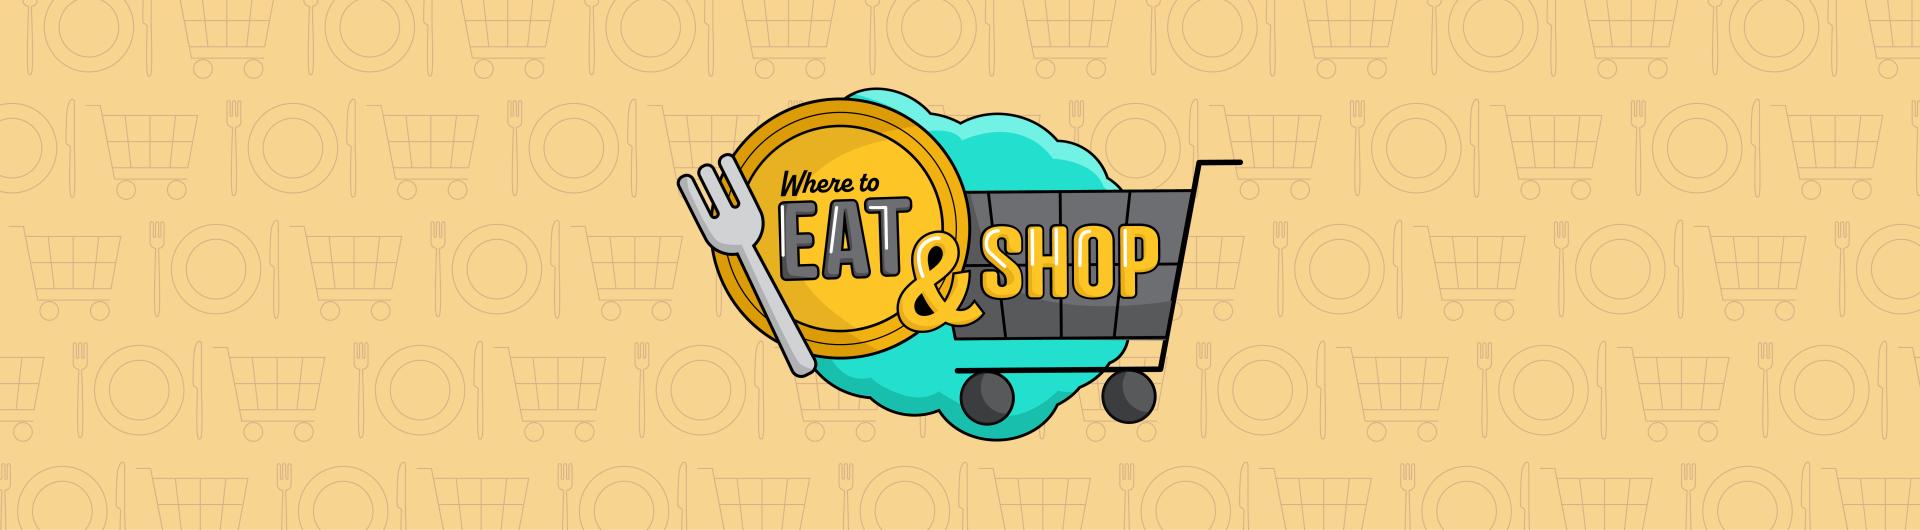 Where to Eat and Shop